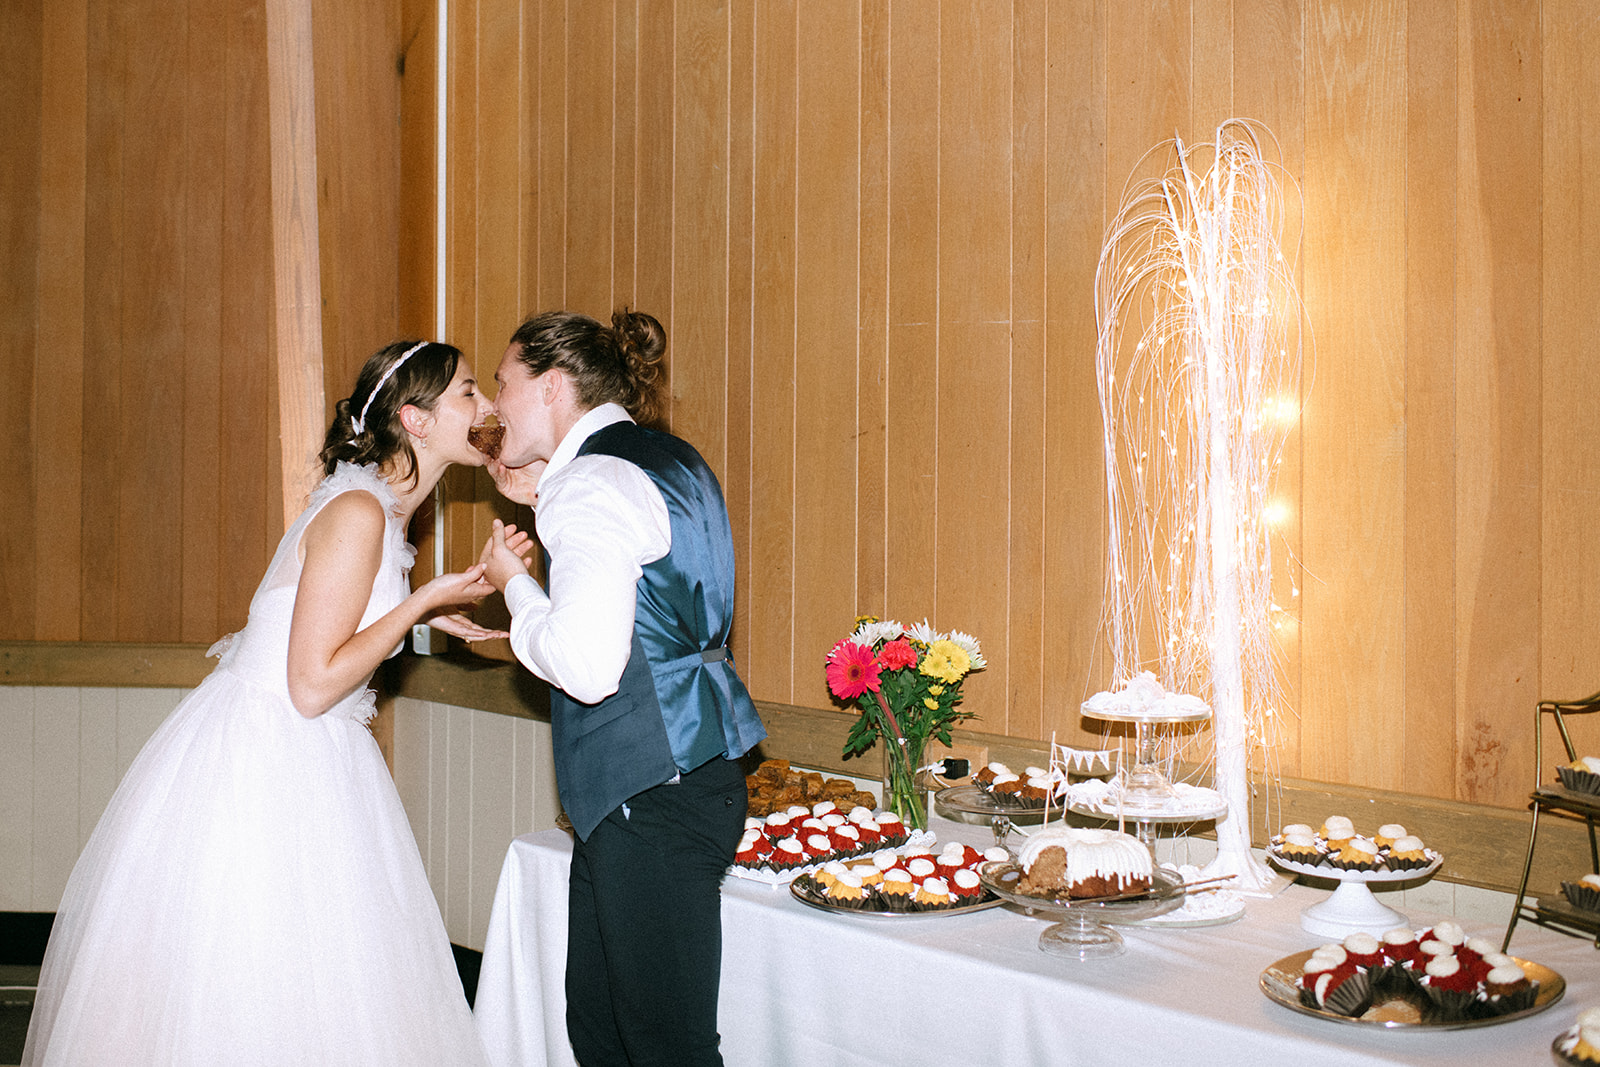 Sewanee Tennessee Spring Wedding Inspired by Wes Anderson